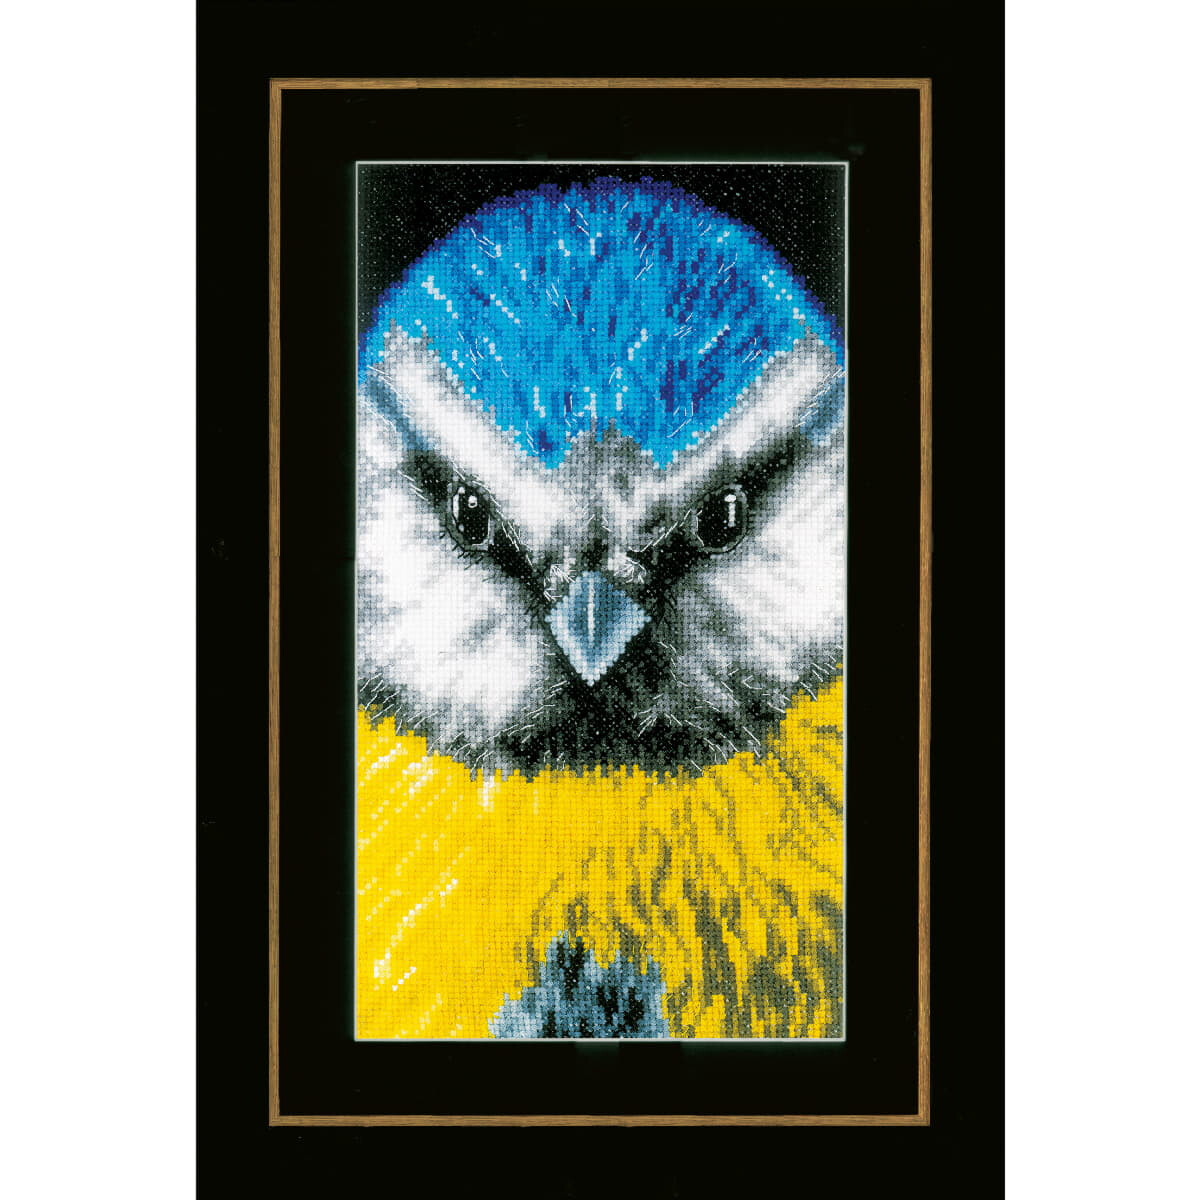 A framed, colorful diamond painting of a bird with a...